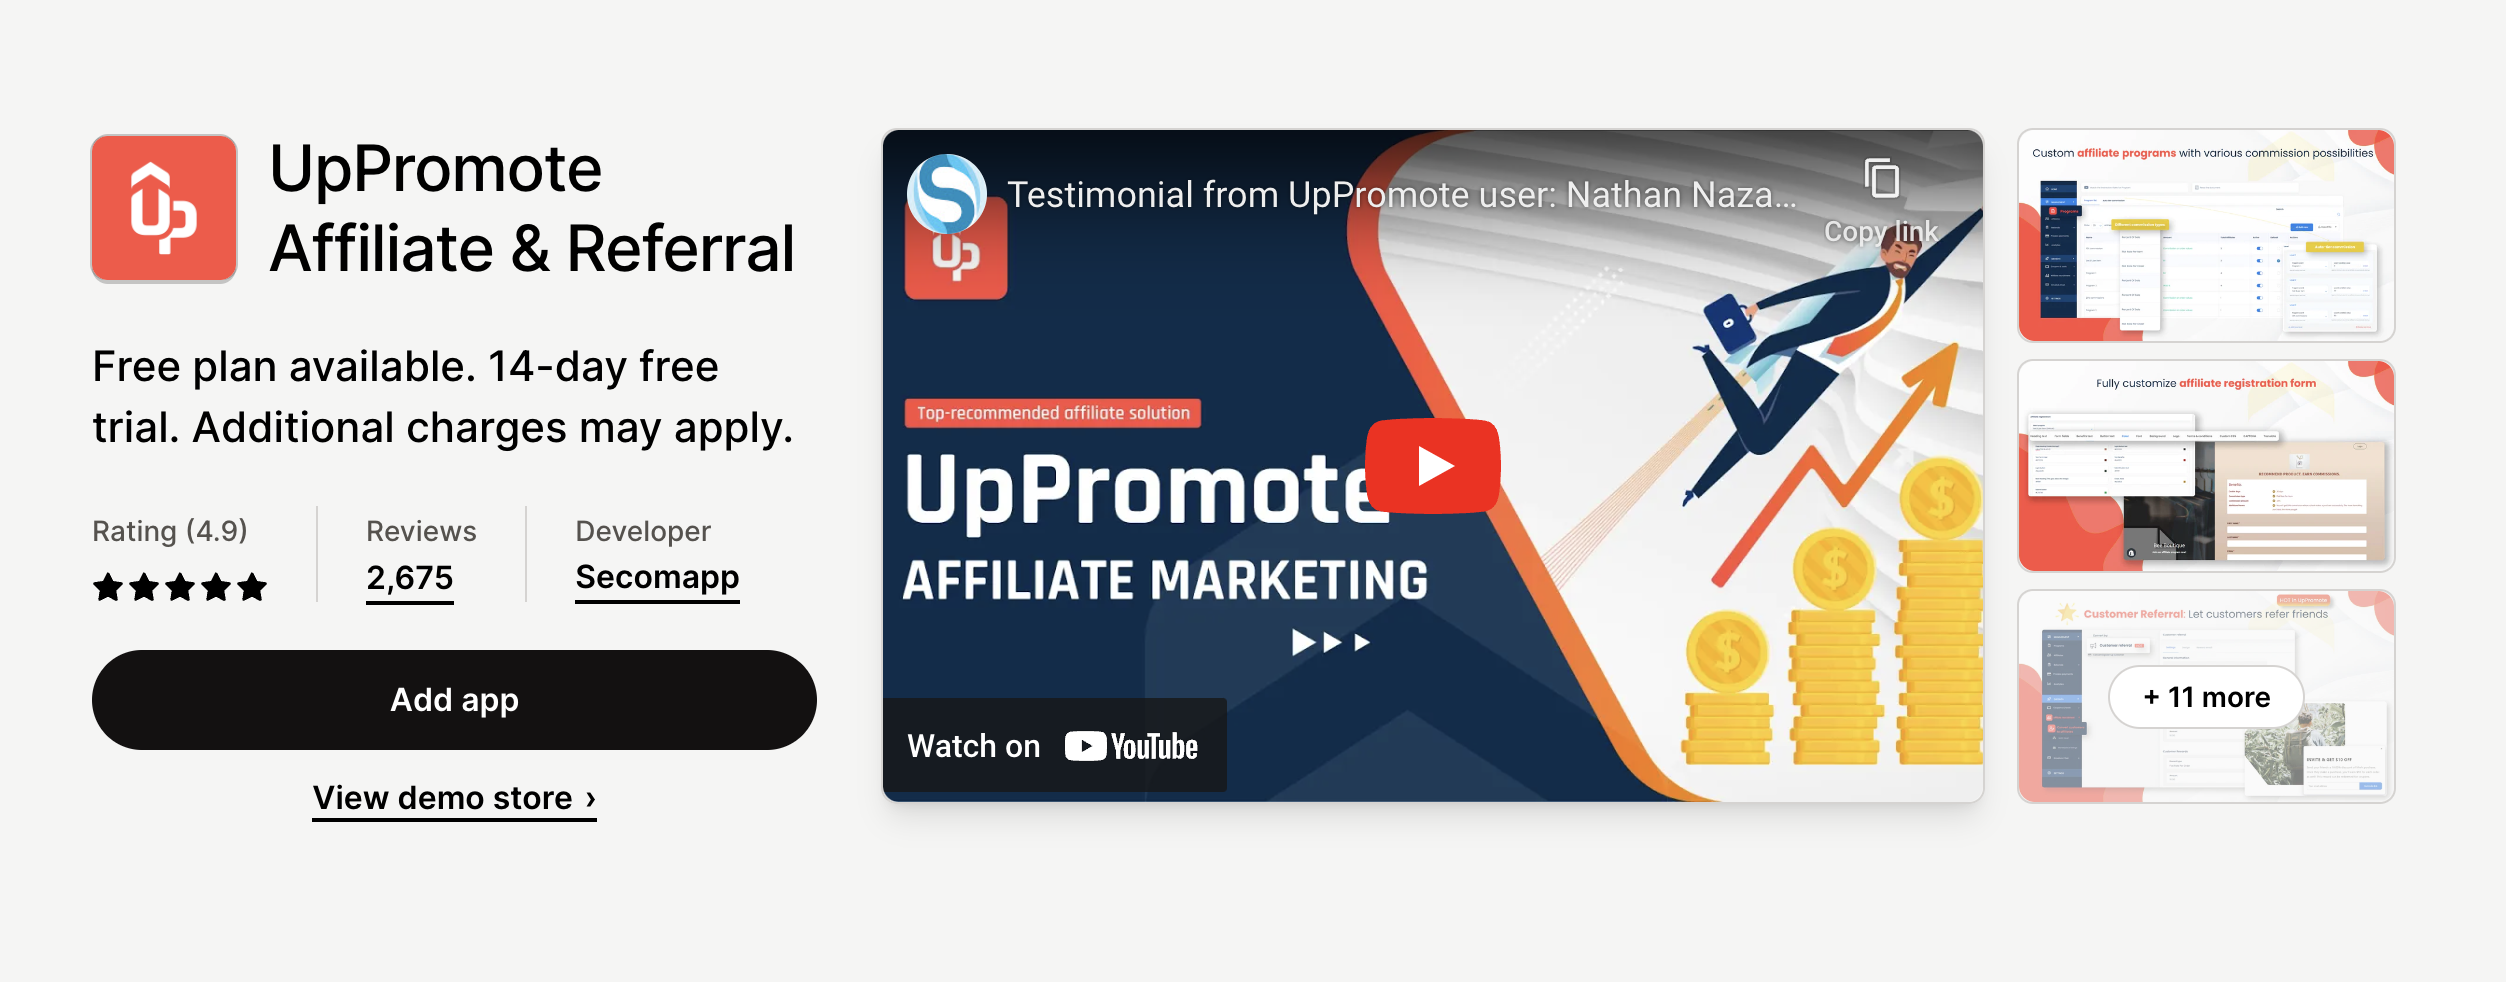 UpPromote: Affiliate & Referral